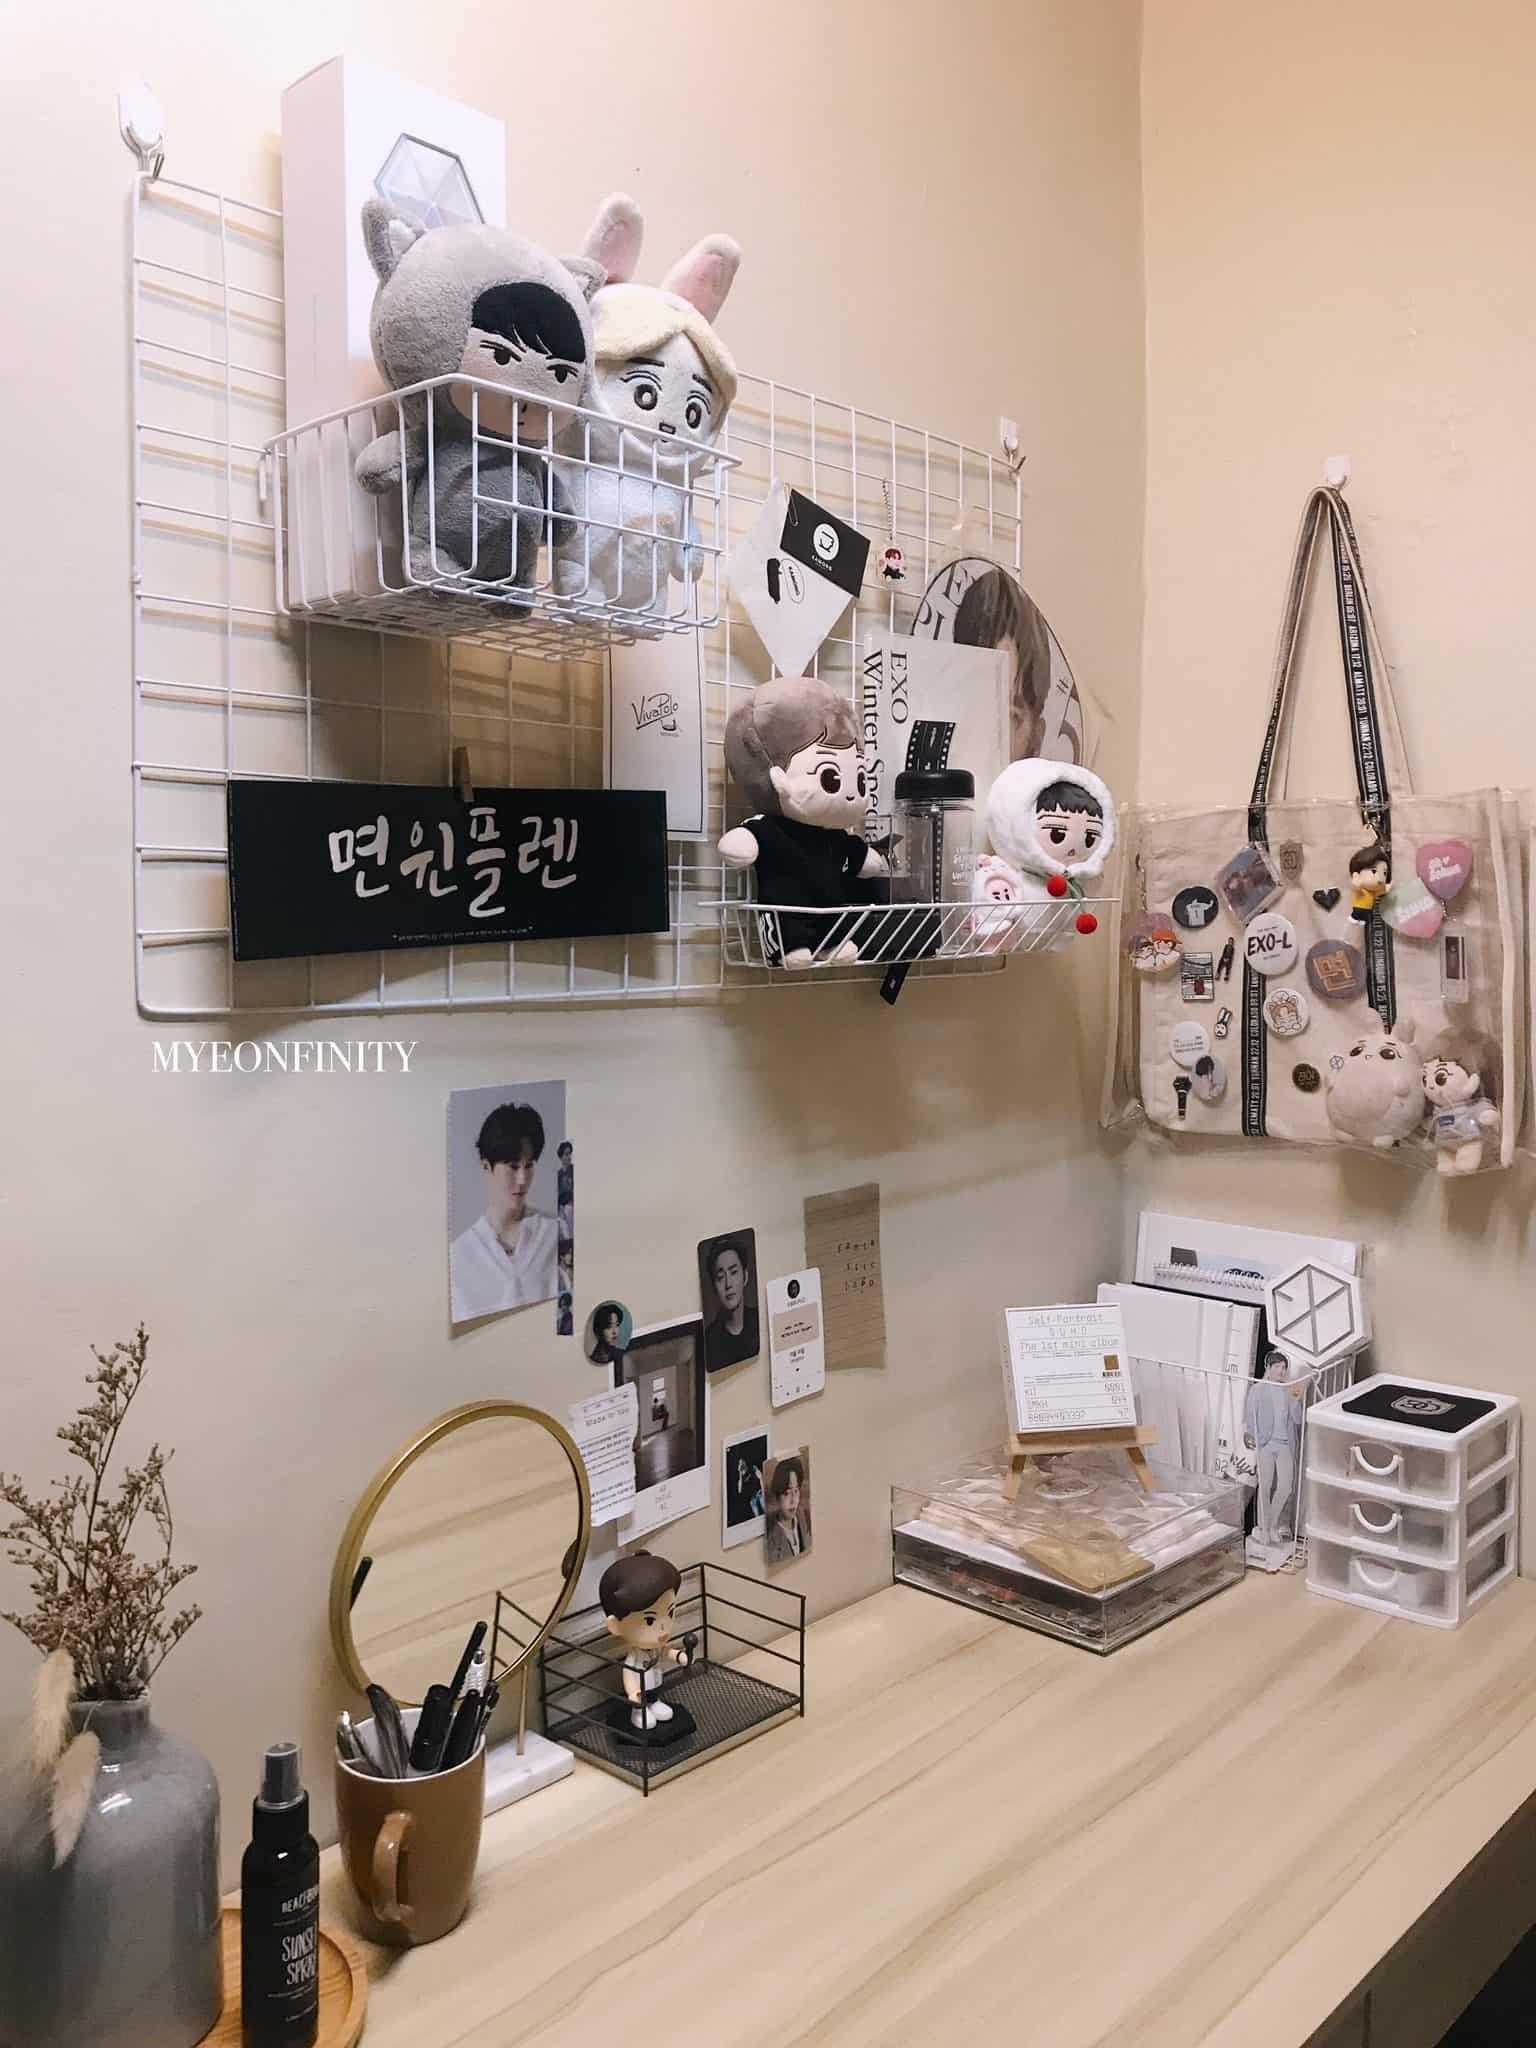 Merch collections of Pinay K-pop fans